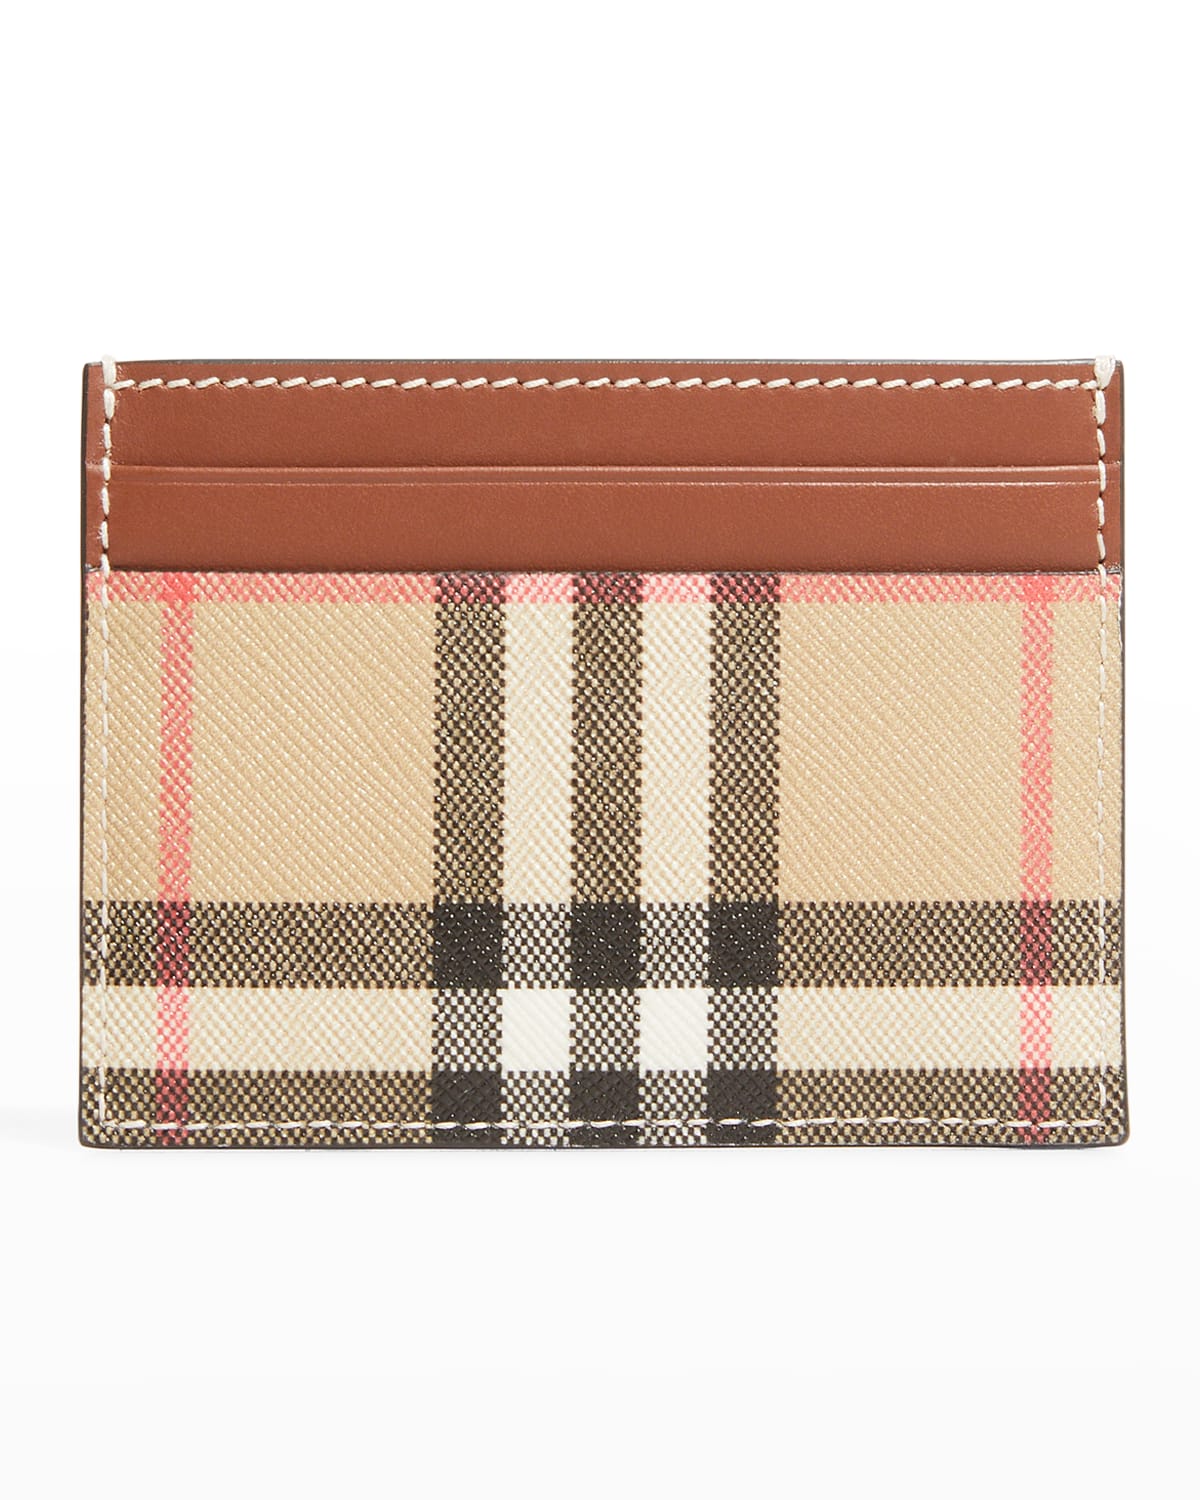 Burberry Somerset Vintage Check Card Case | Neiman Marcus